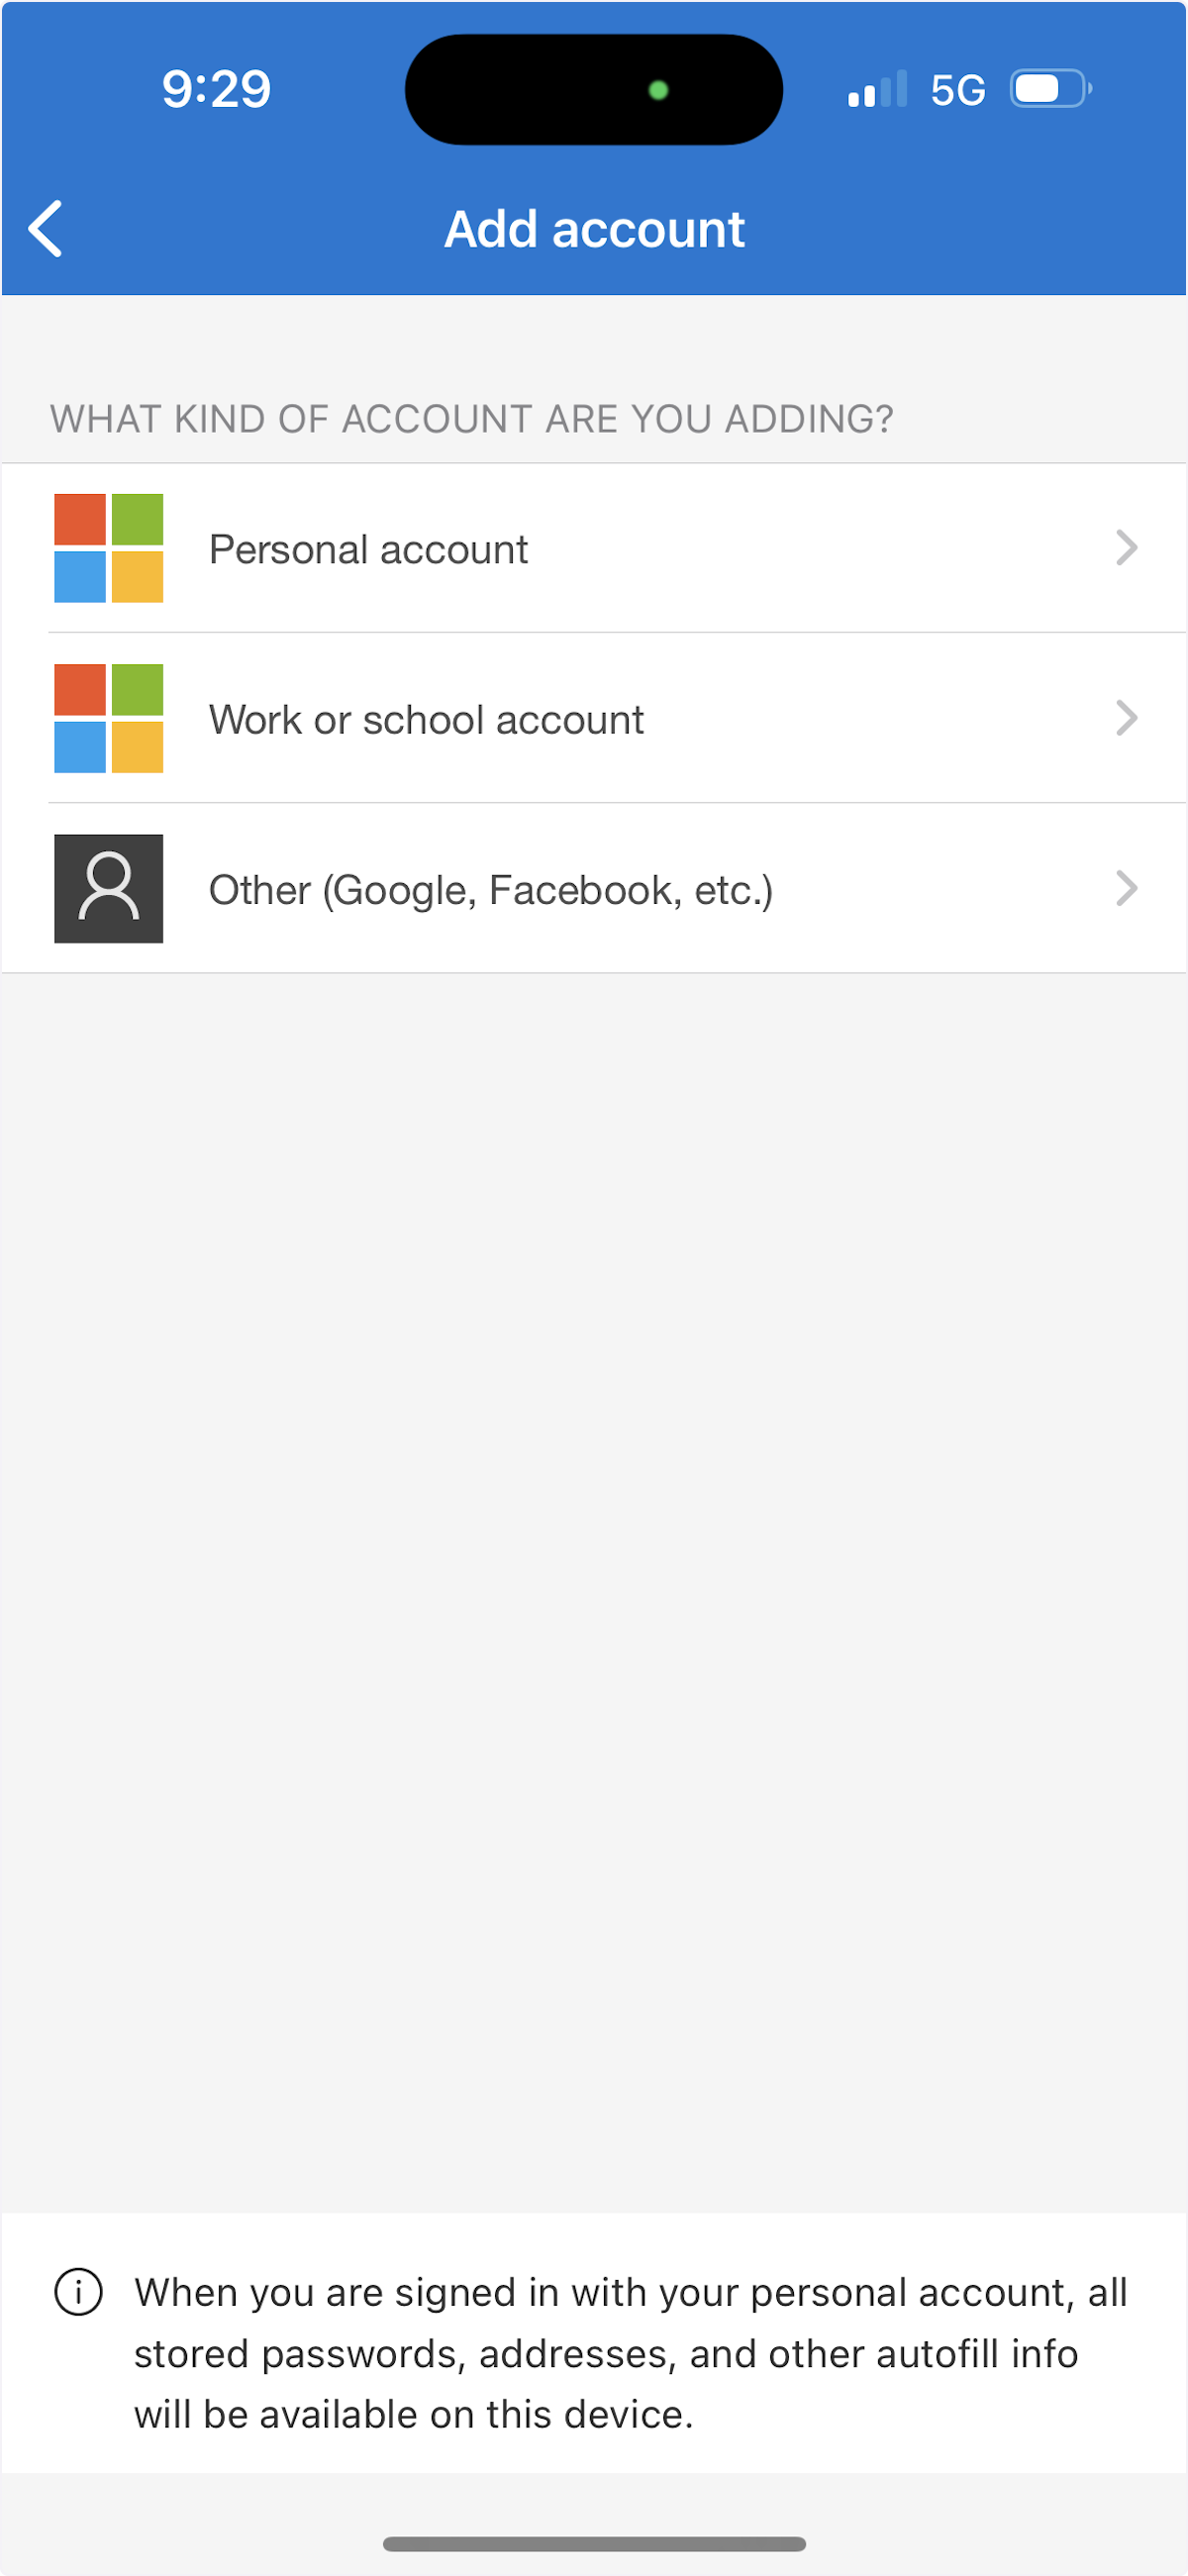 Once you tap add account, this screen pops up.  Tap Work or school account.